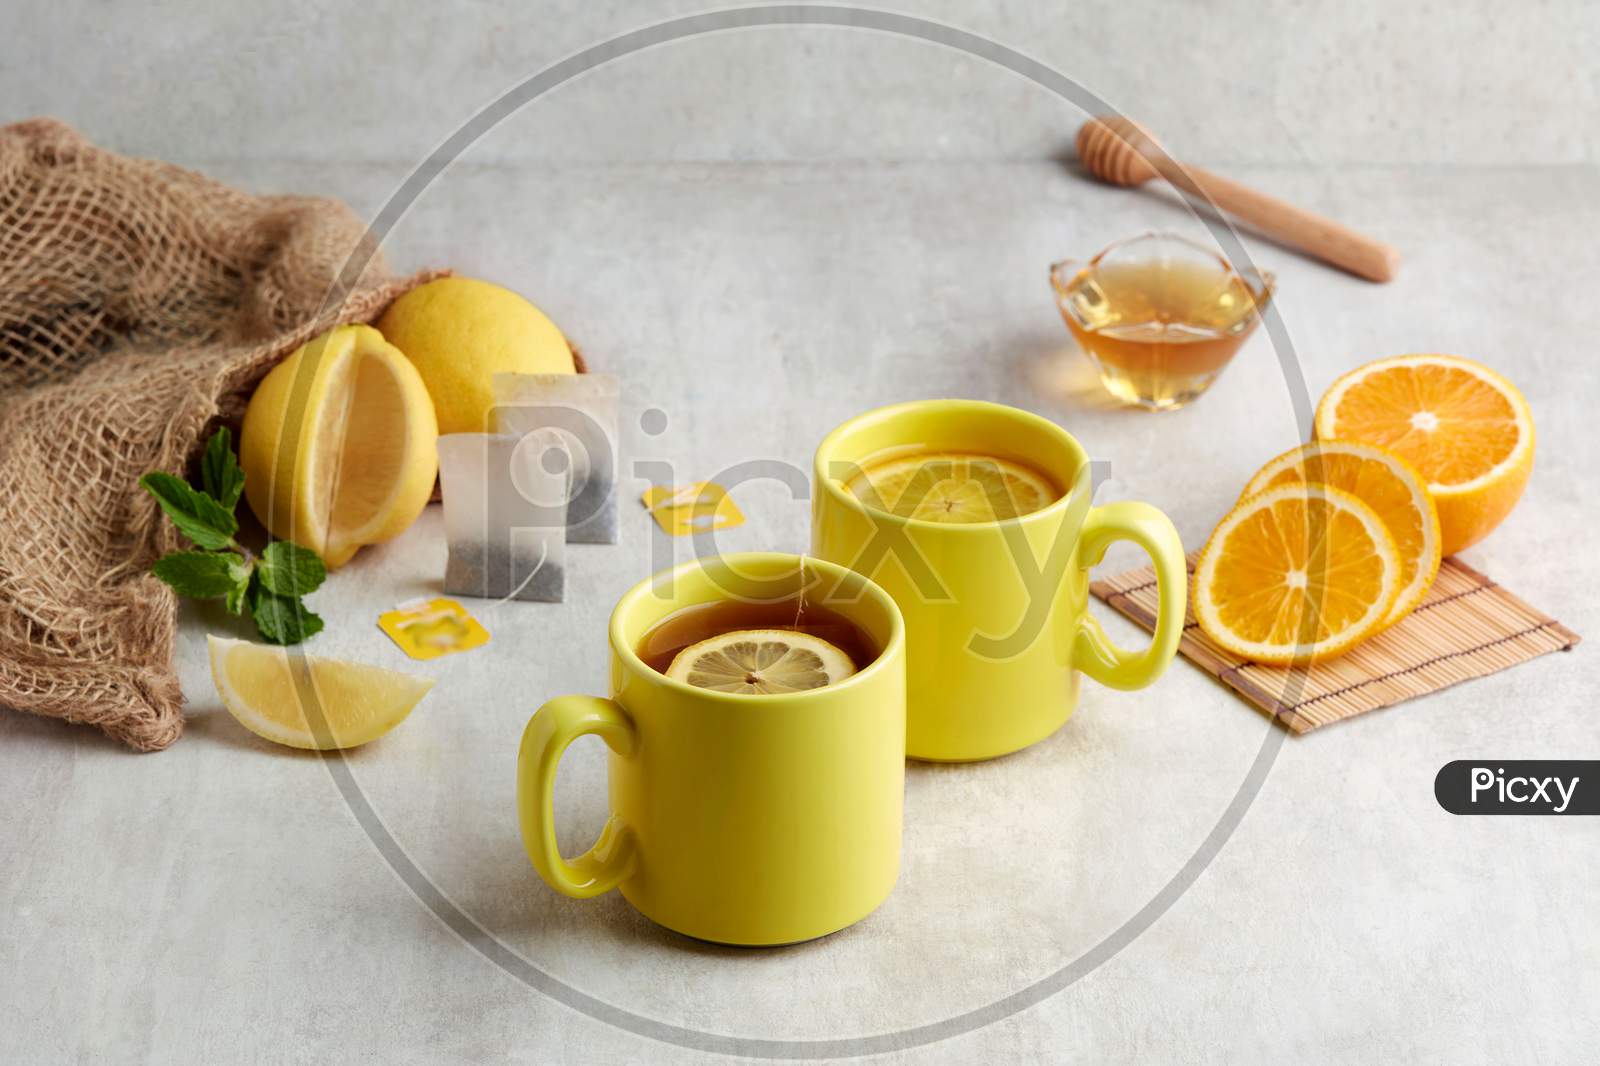 Two Yellow Cup Of Warming Honey Citron Tea With Slices Of Orange And Lemon.